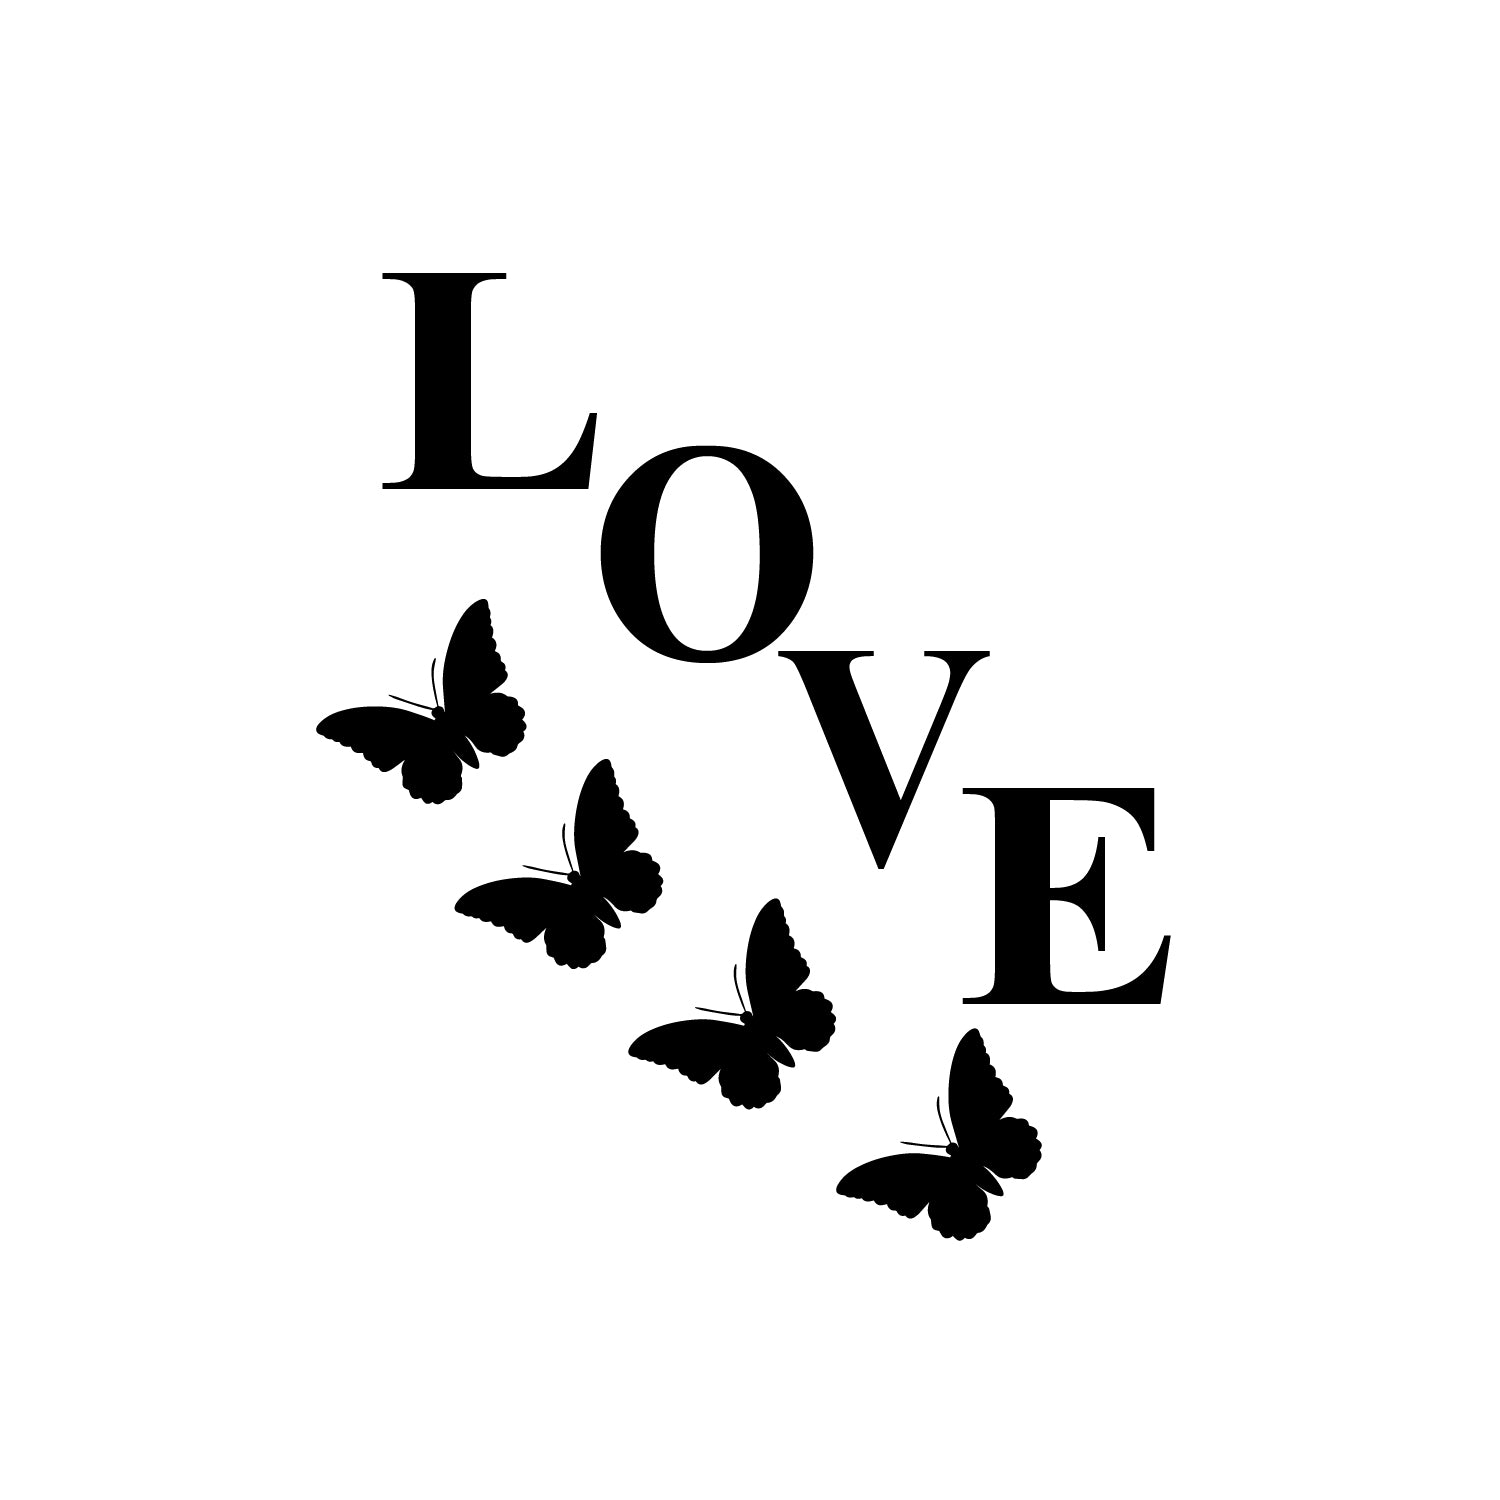 Love With Butterfly Black Engineered Wood Wall Art Cutout, Ready To Hang Home Decor